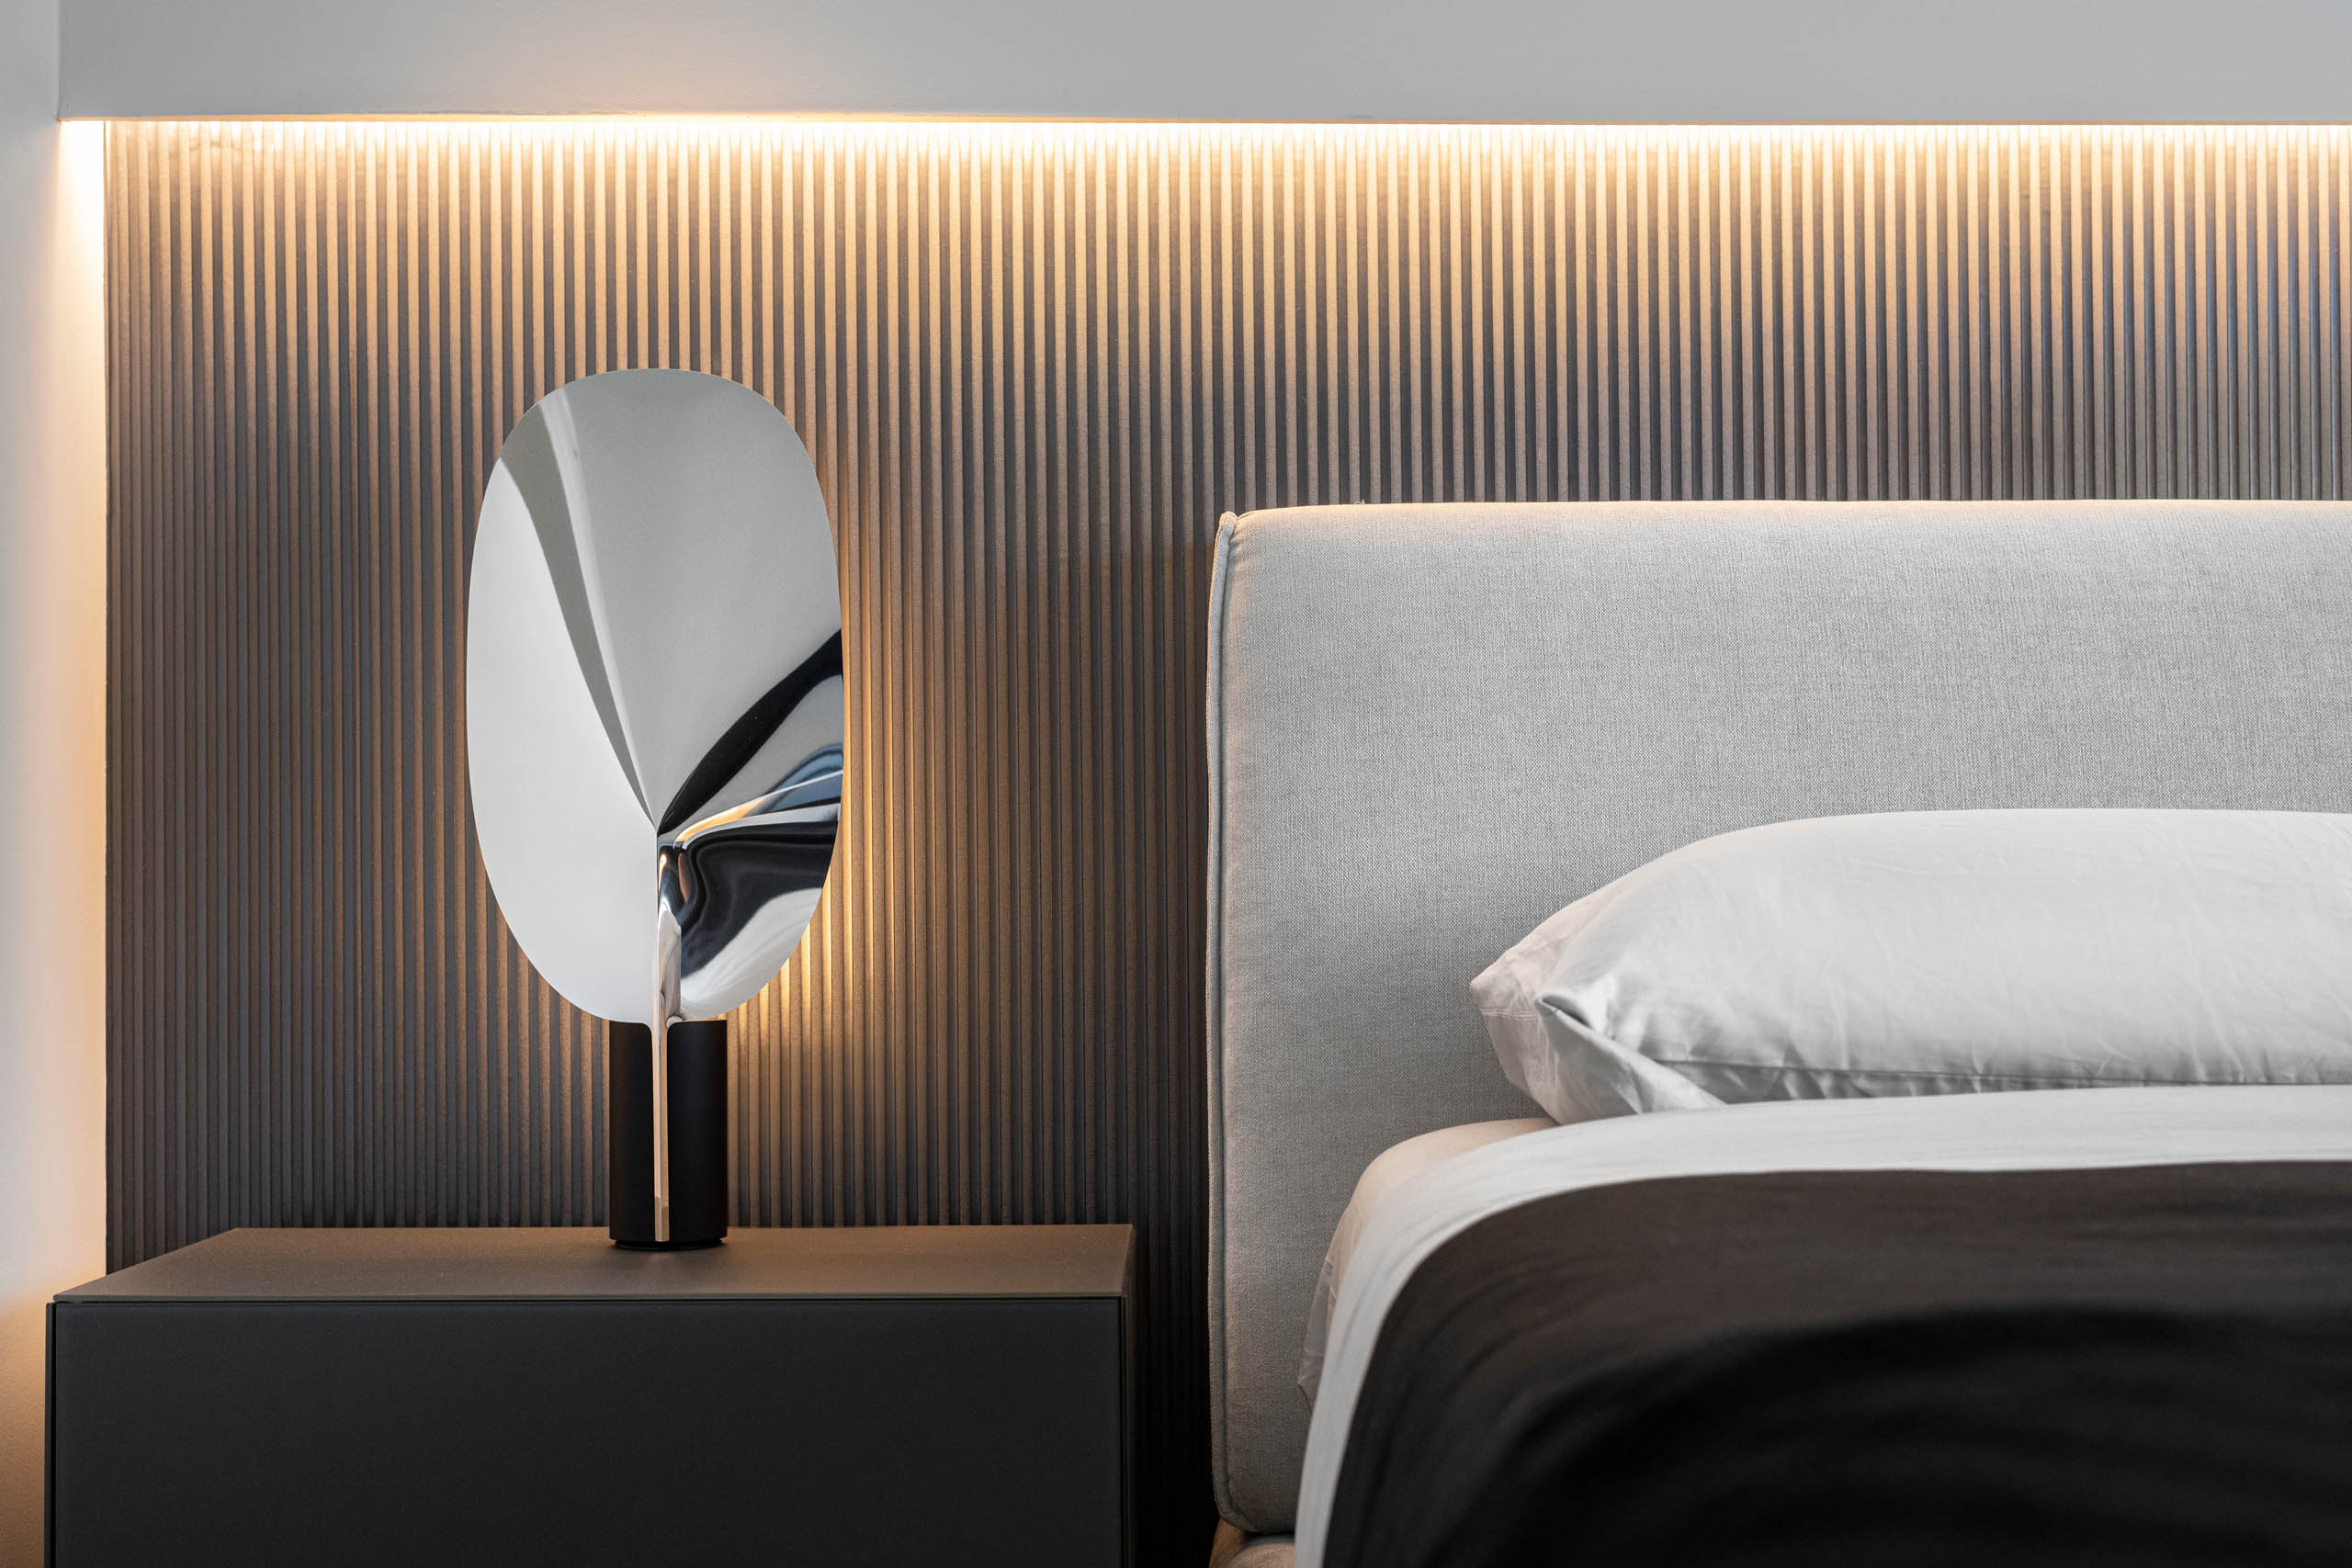 Example of Miami Interior Design project all black and white with white headboard bed, black duvet cover, biomimetic table lamp in leaf format in glossy chrome material. background of stripped black wallpaper with LED cove ilumination.